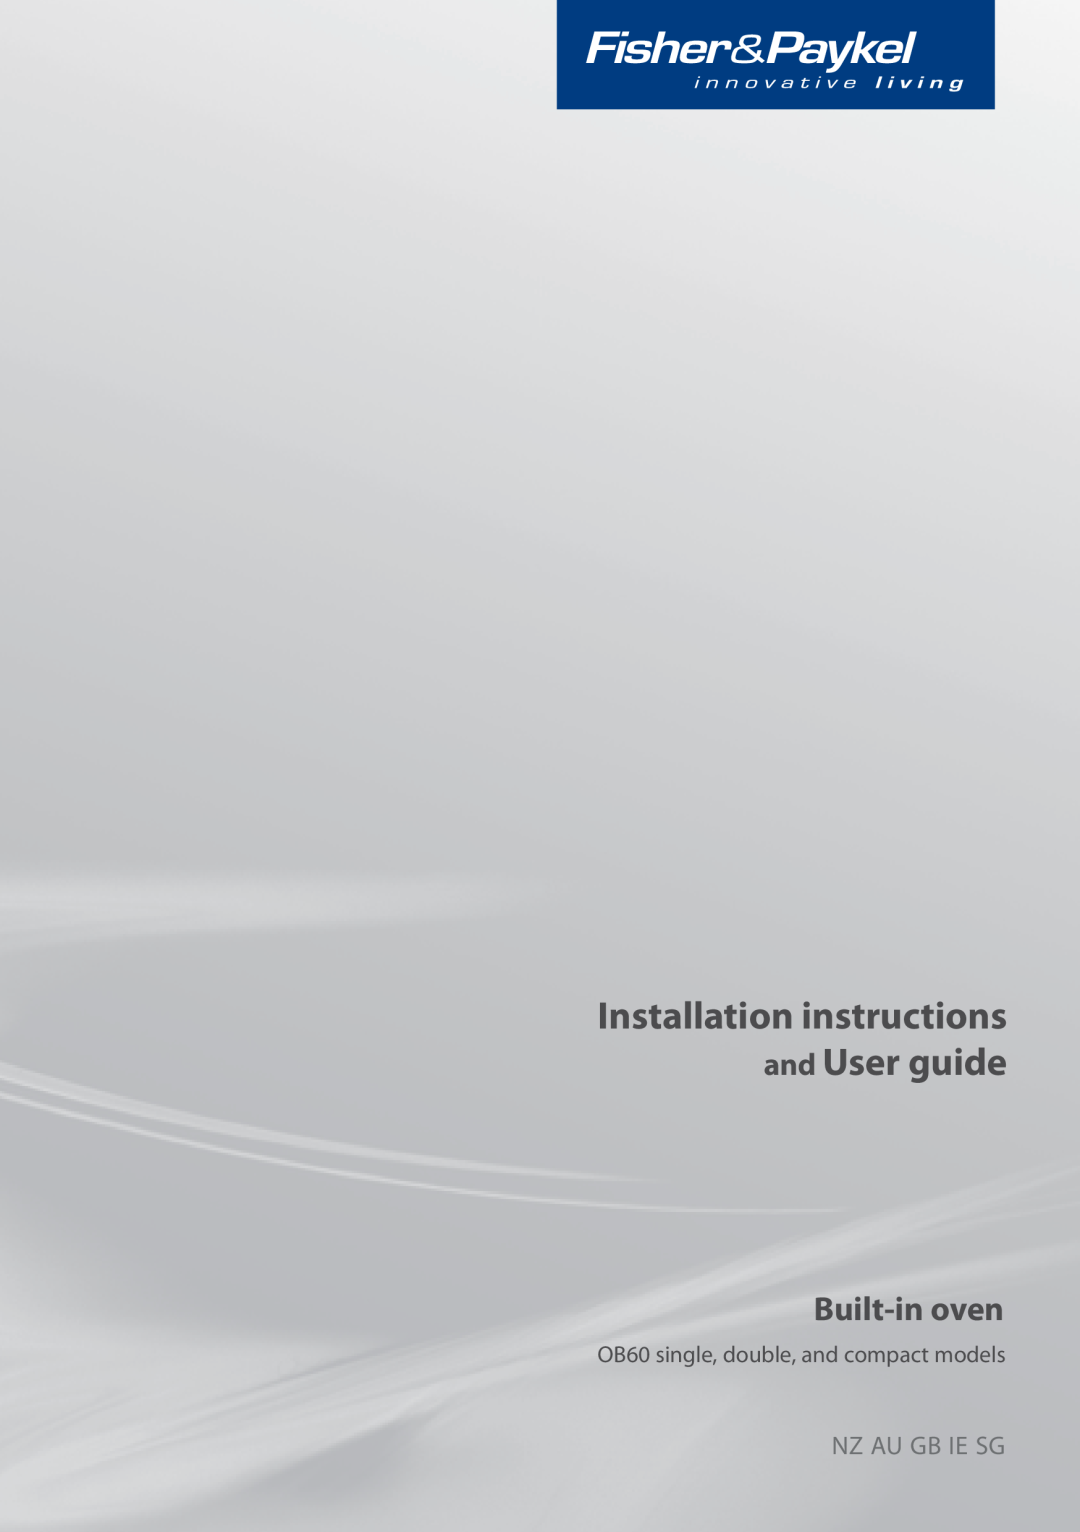 Fisher & Paykel OB60 installation instructions Installation instructions and User guide, Built-in oven, Nz Au Gb Ie Sg 